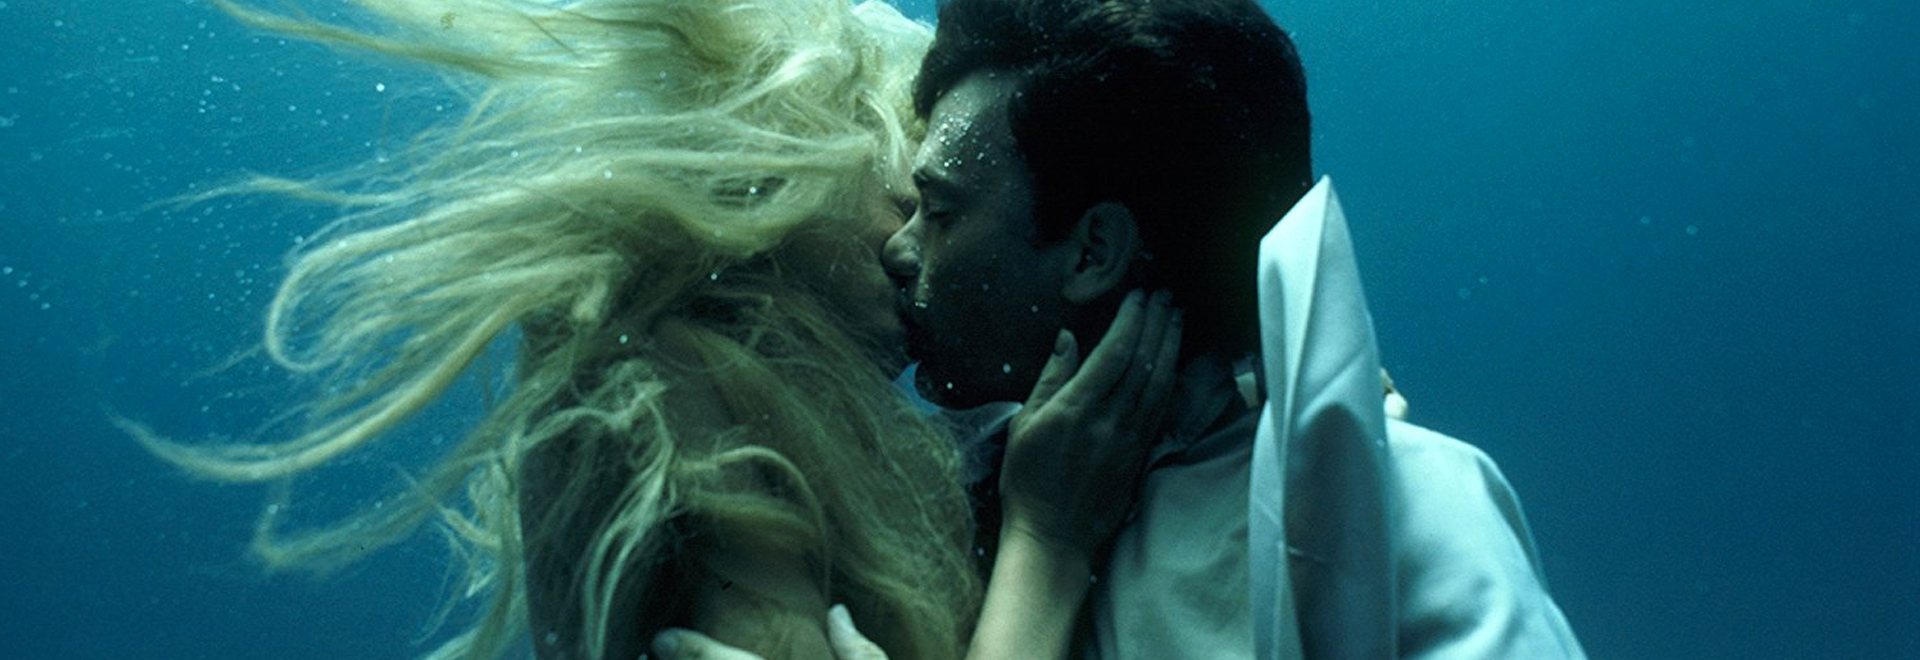 Underwater love - Seven films to watch before 'The Shape of Water'